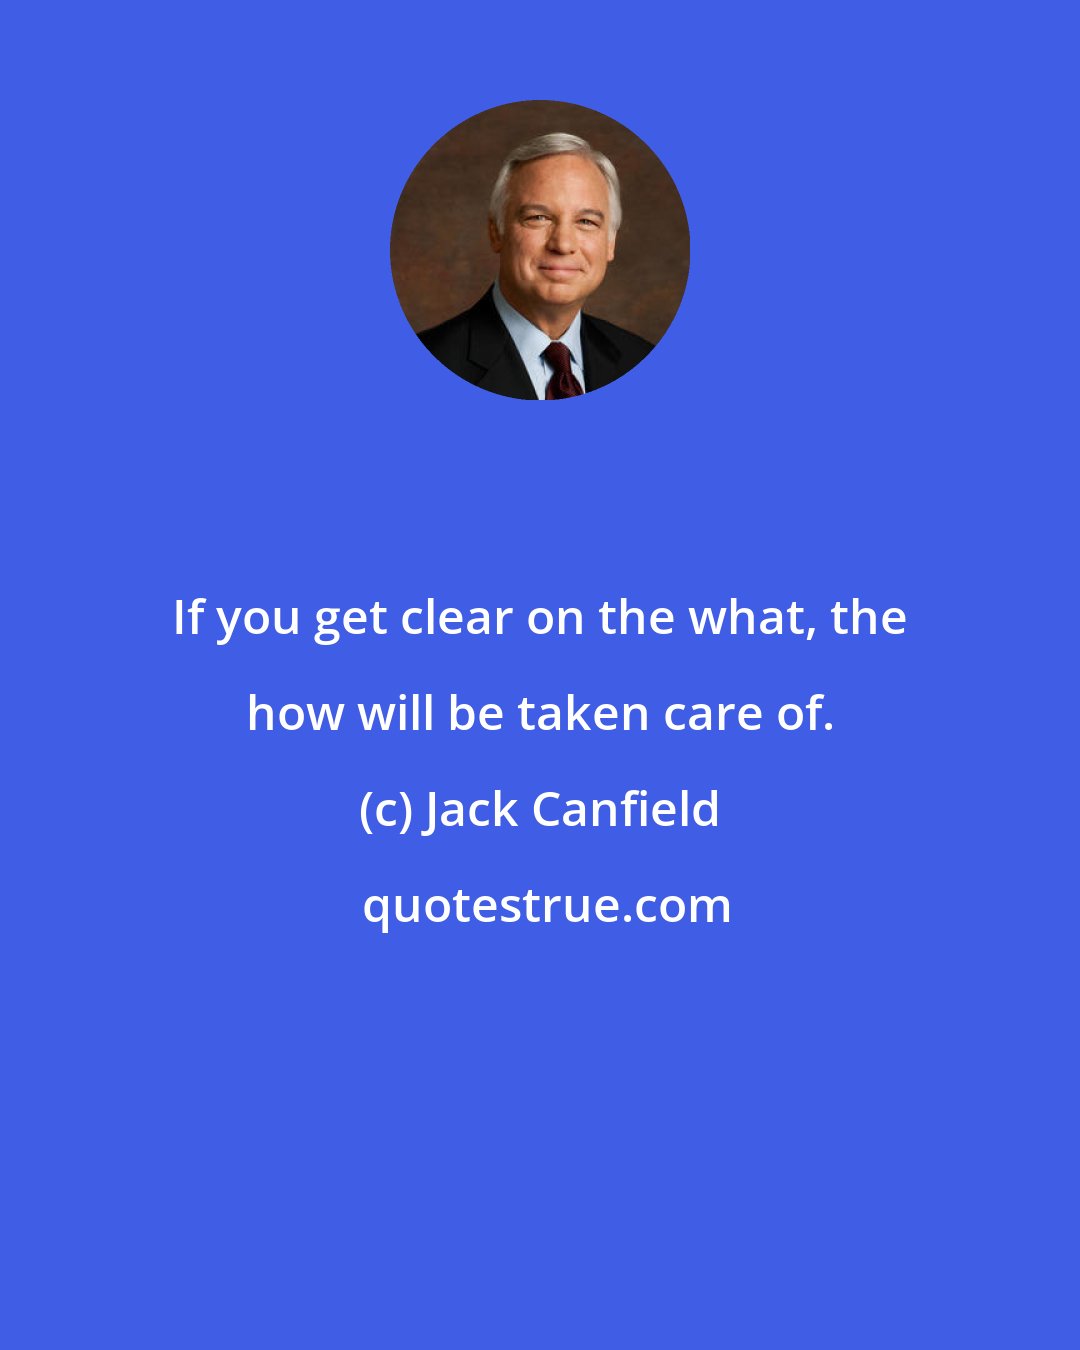 Jack Canfield: If you get clear on the what, the how will be taken care of.